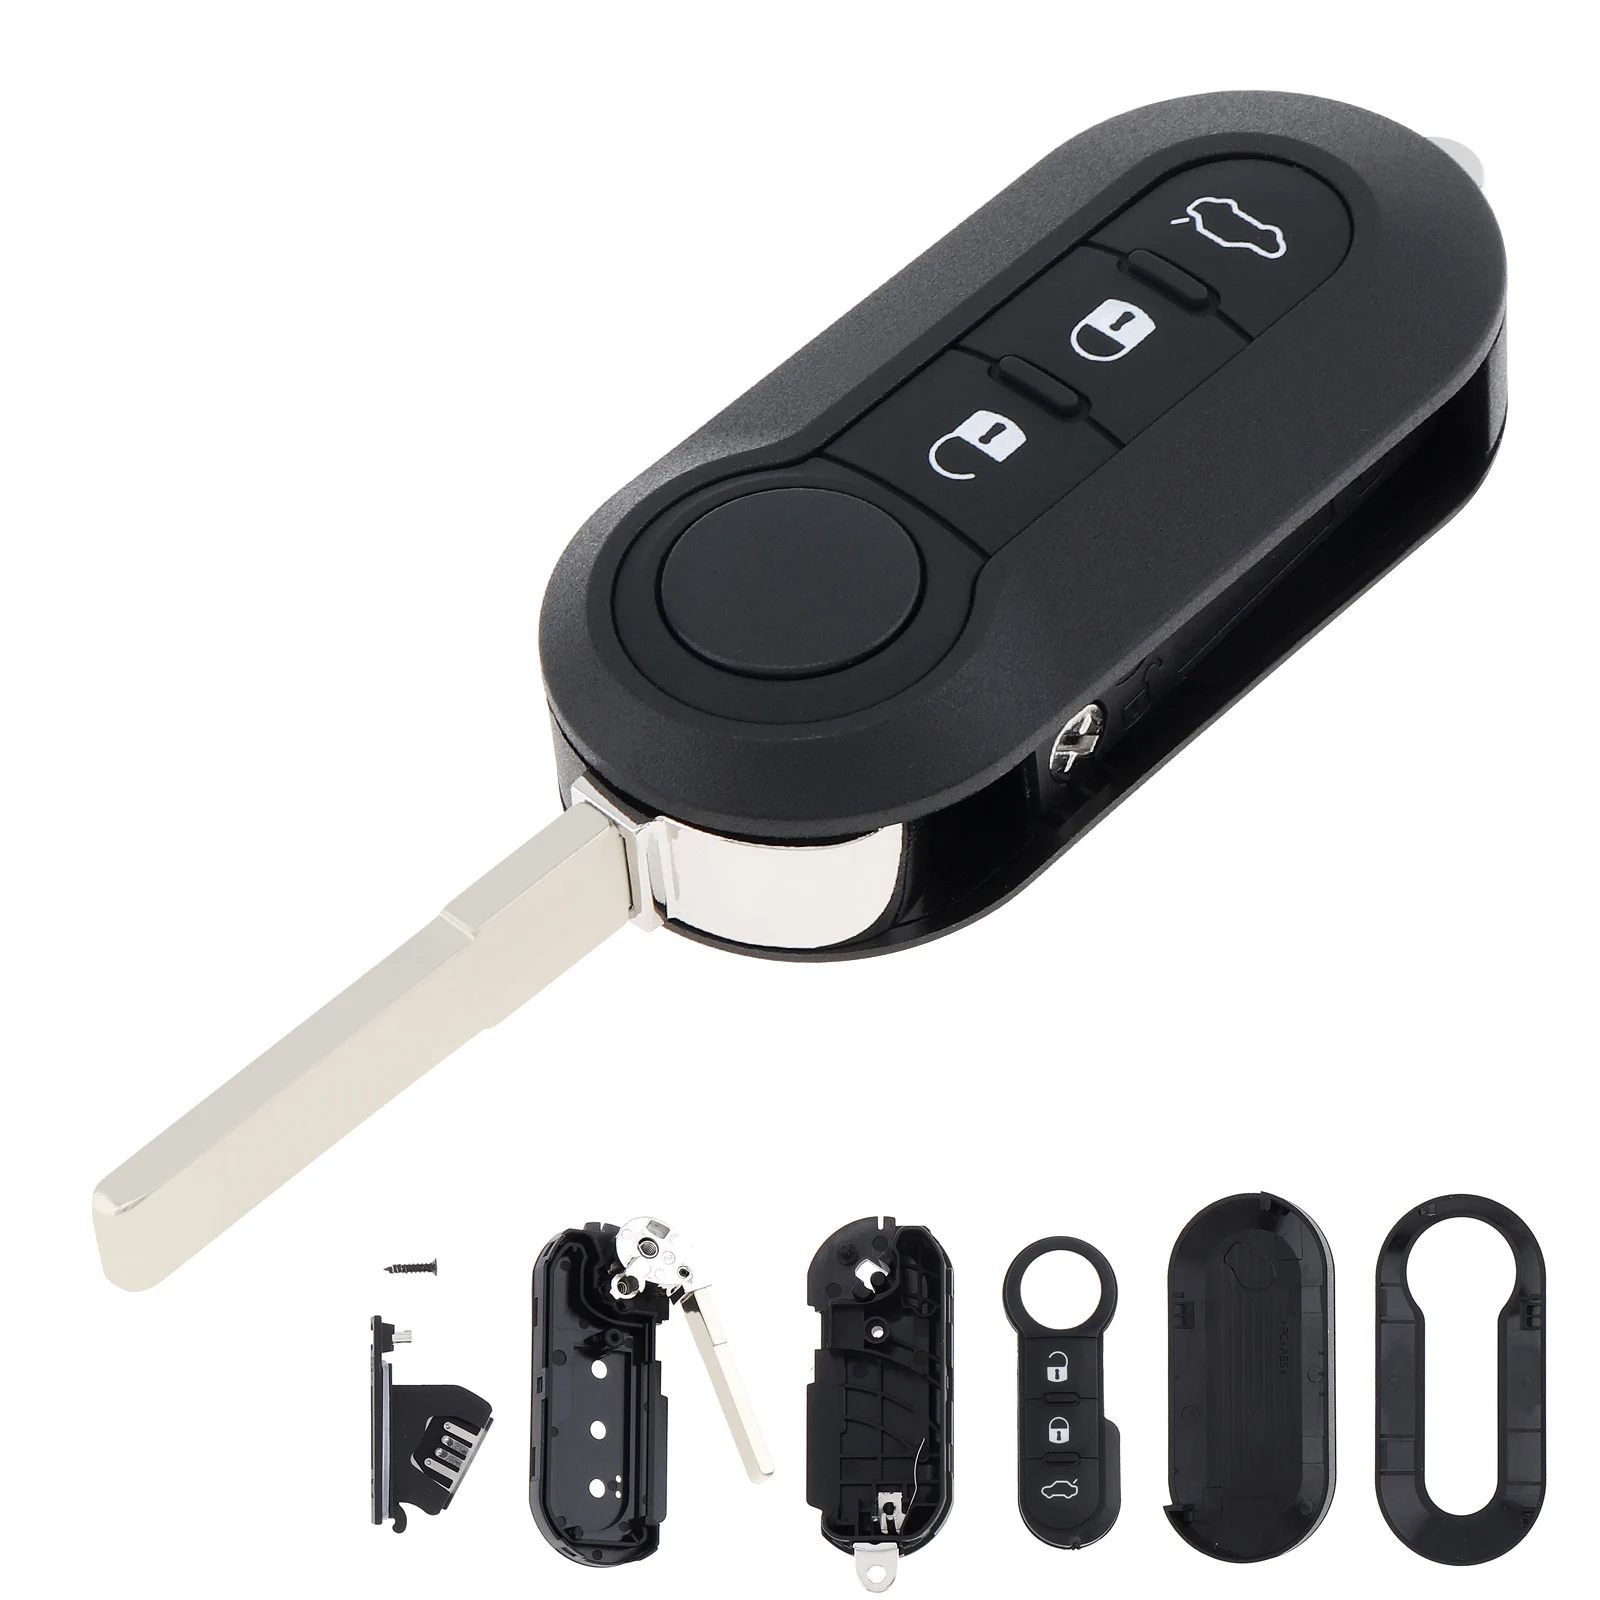 3 Buttons Car Key Fob Shell Remote Control Folding Housing Uncut Blade Key Case Replacement Fit for Fiat 500 Punto